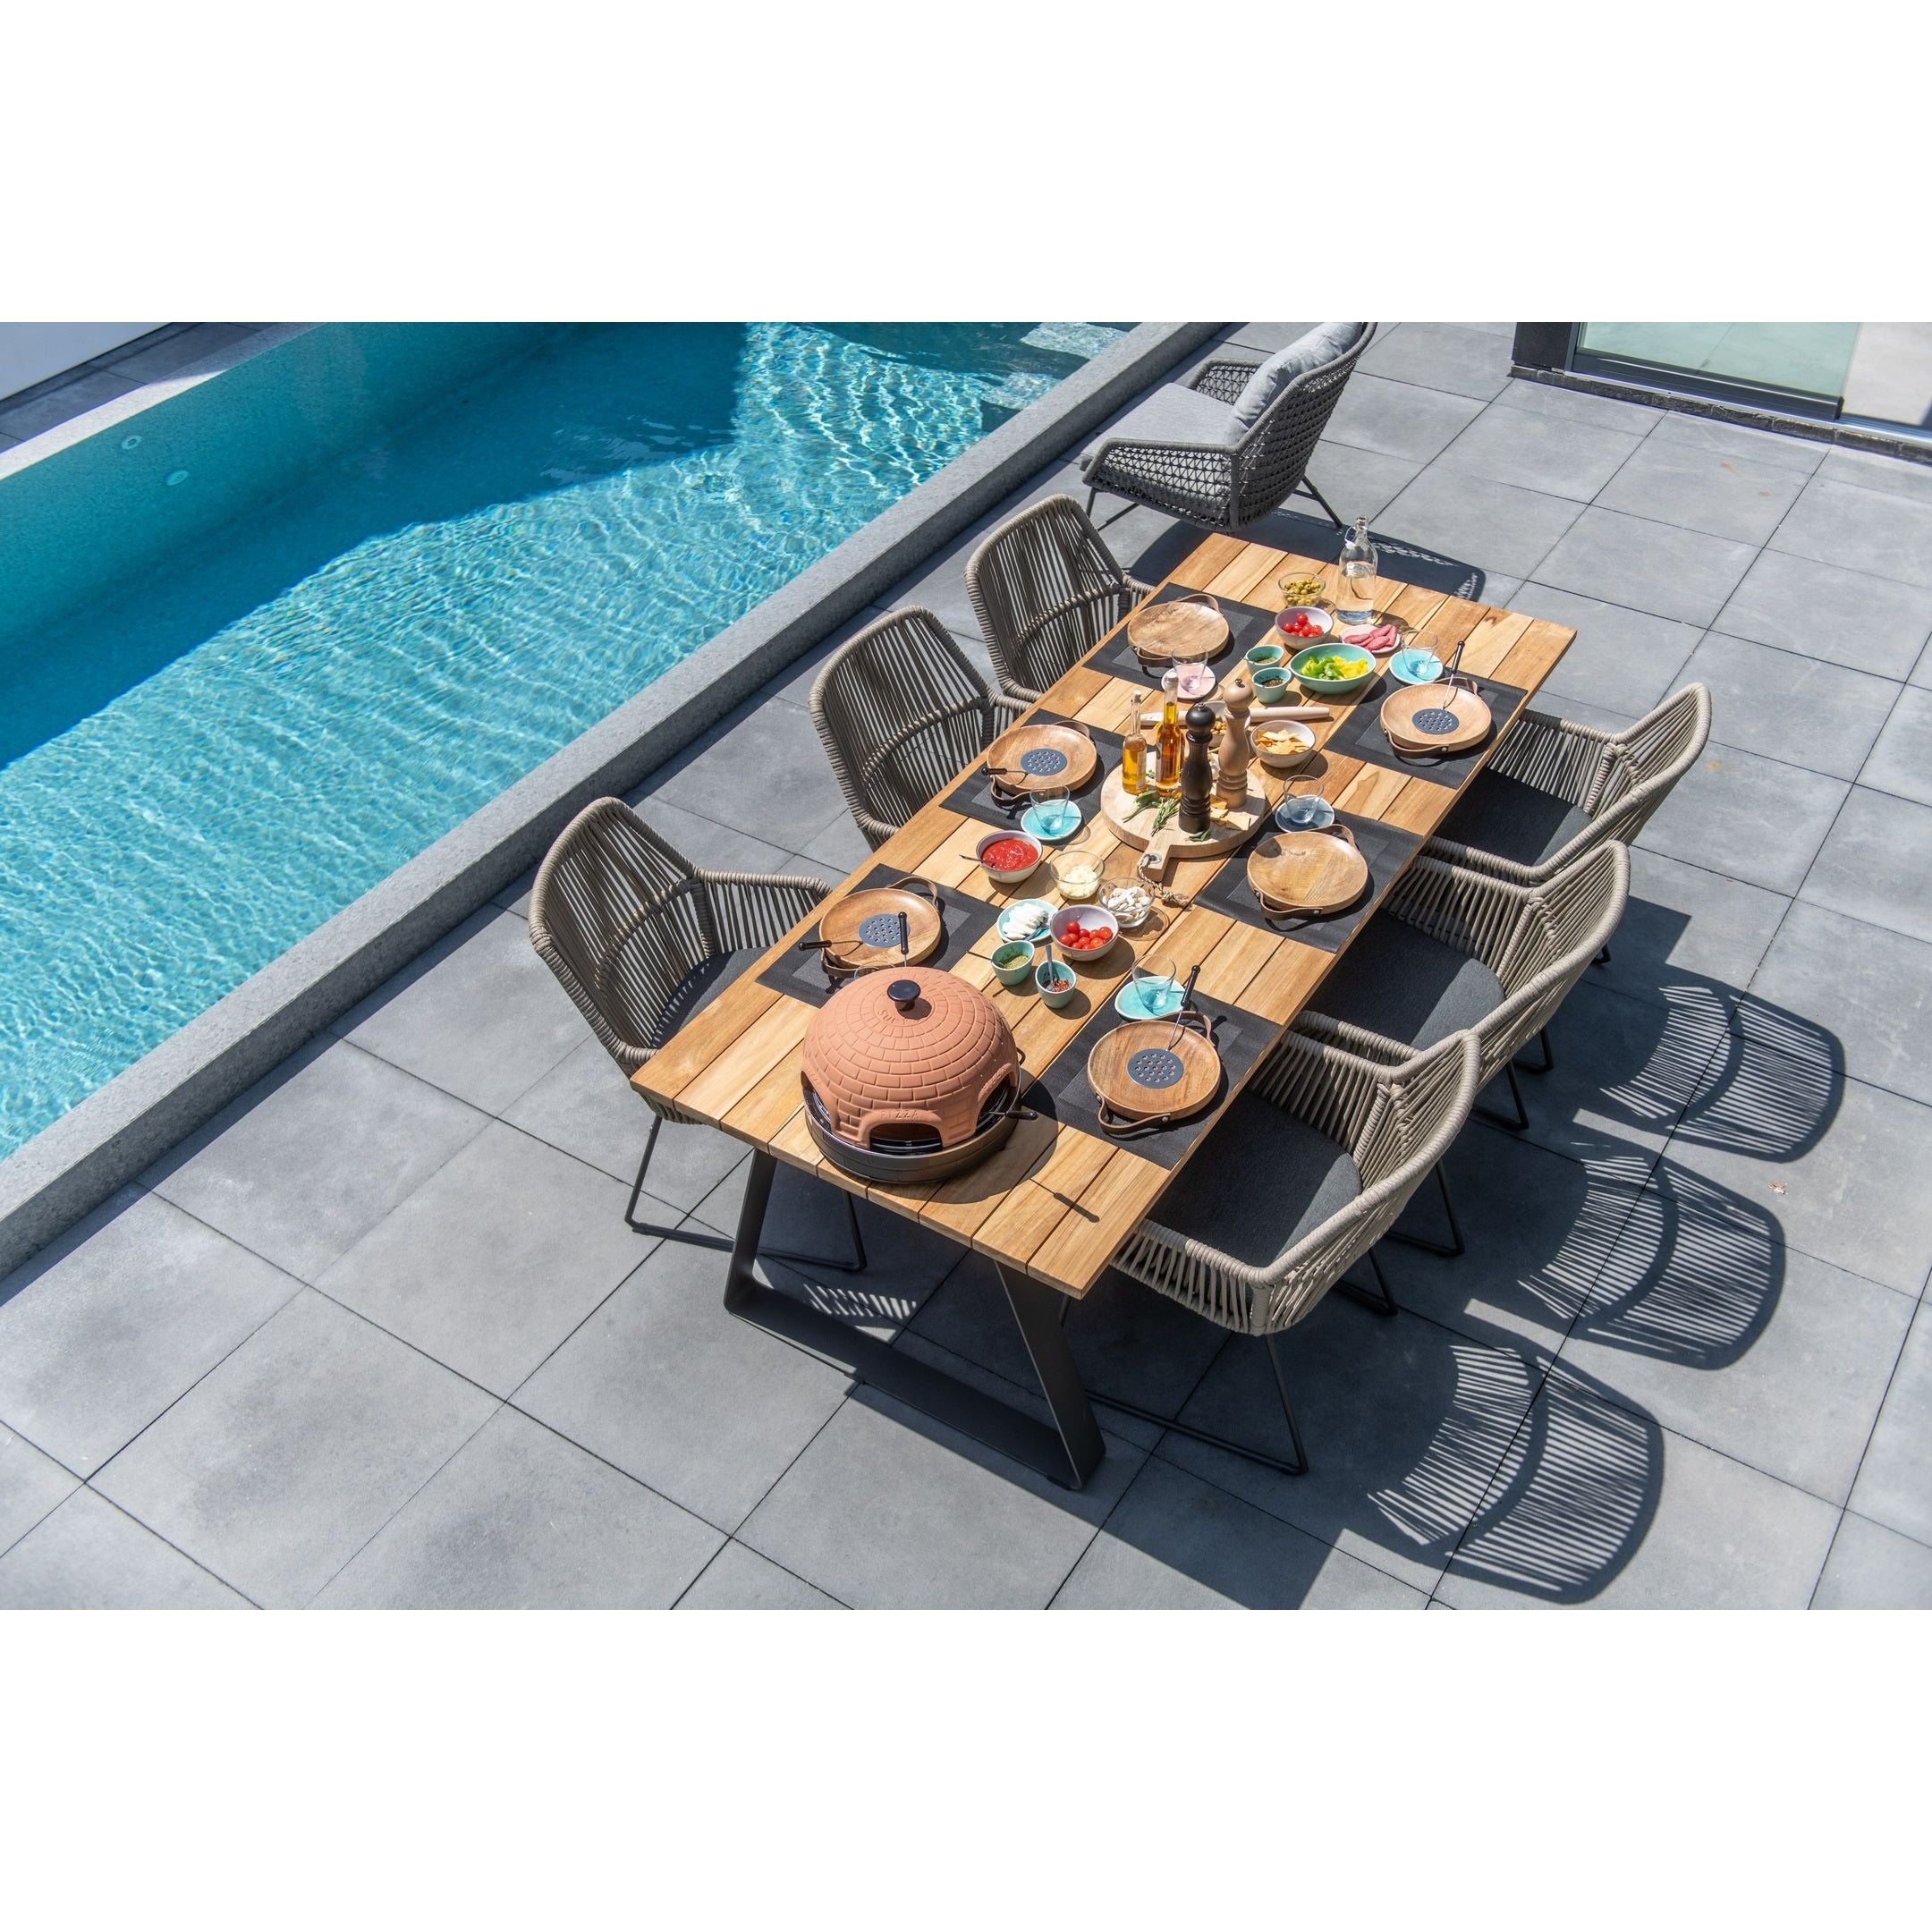 4 Seasons Outdoor Ramblas 6 Seat Dining Set with Basso Dining Table and Teak Top